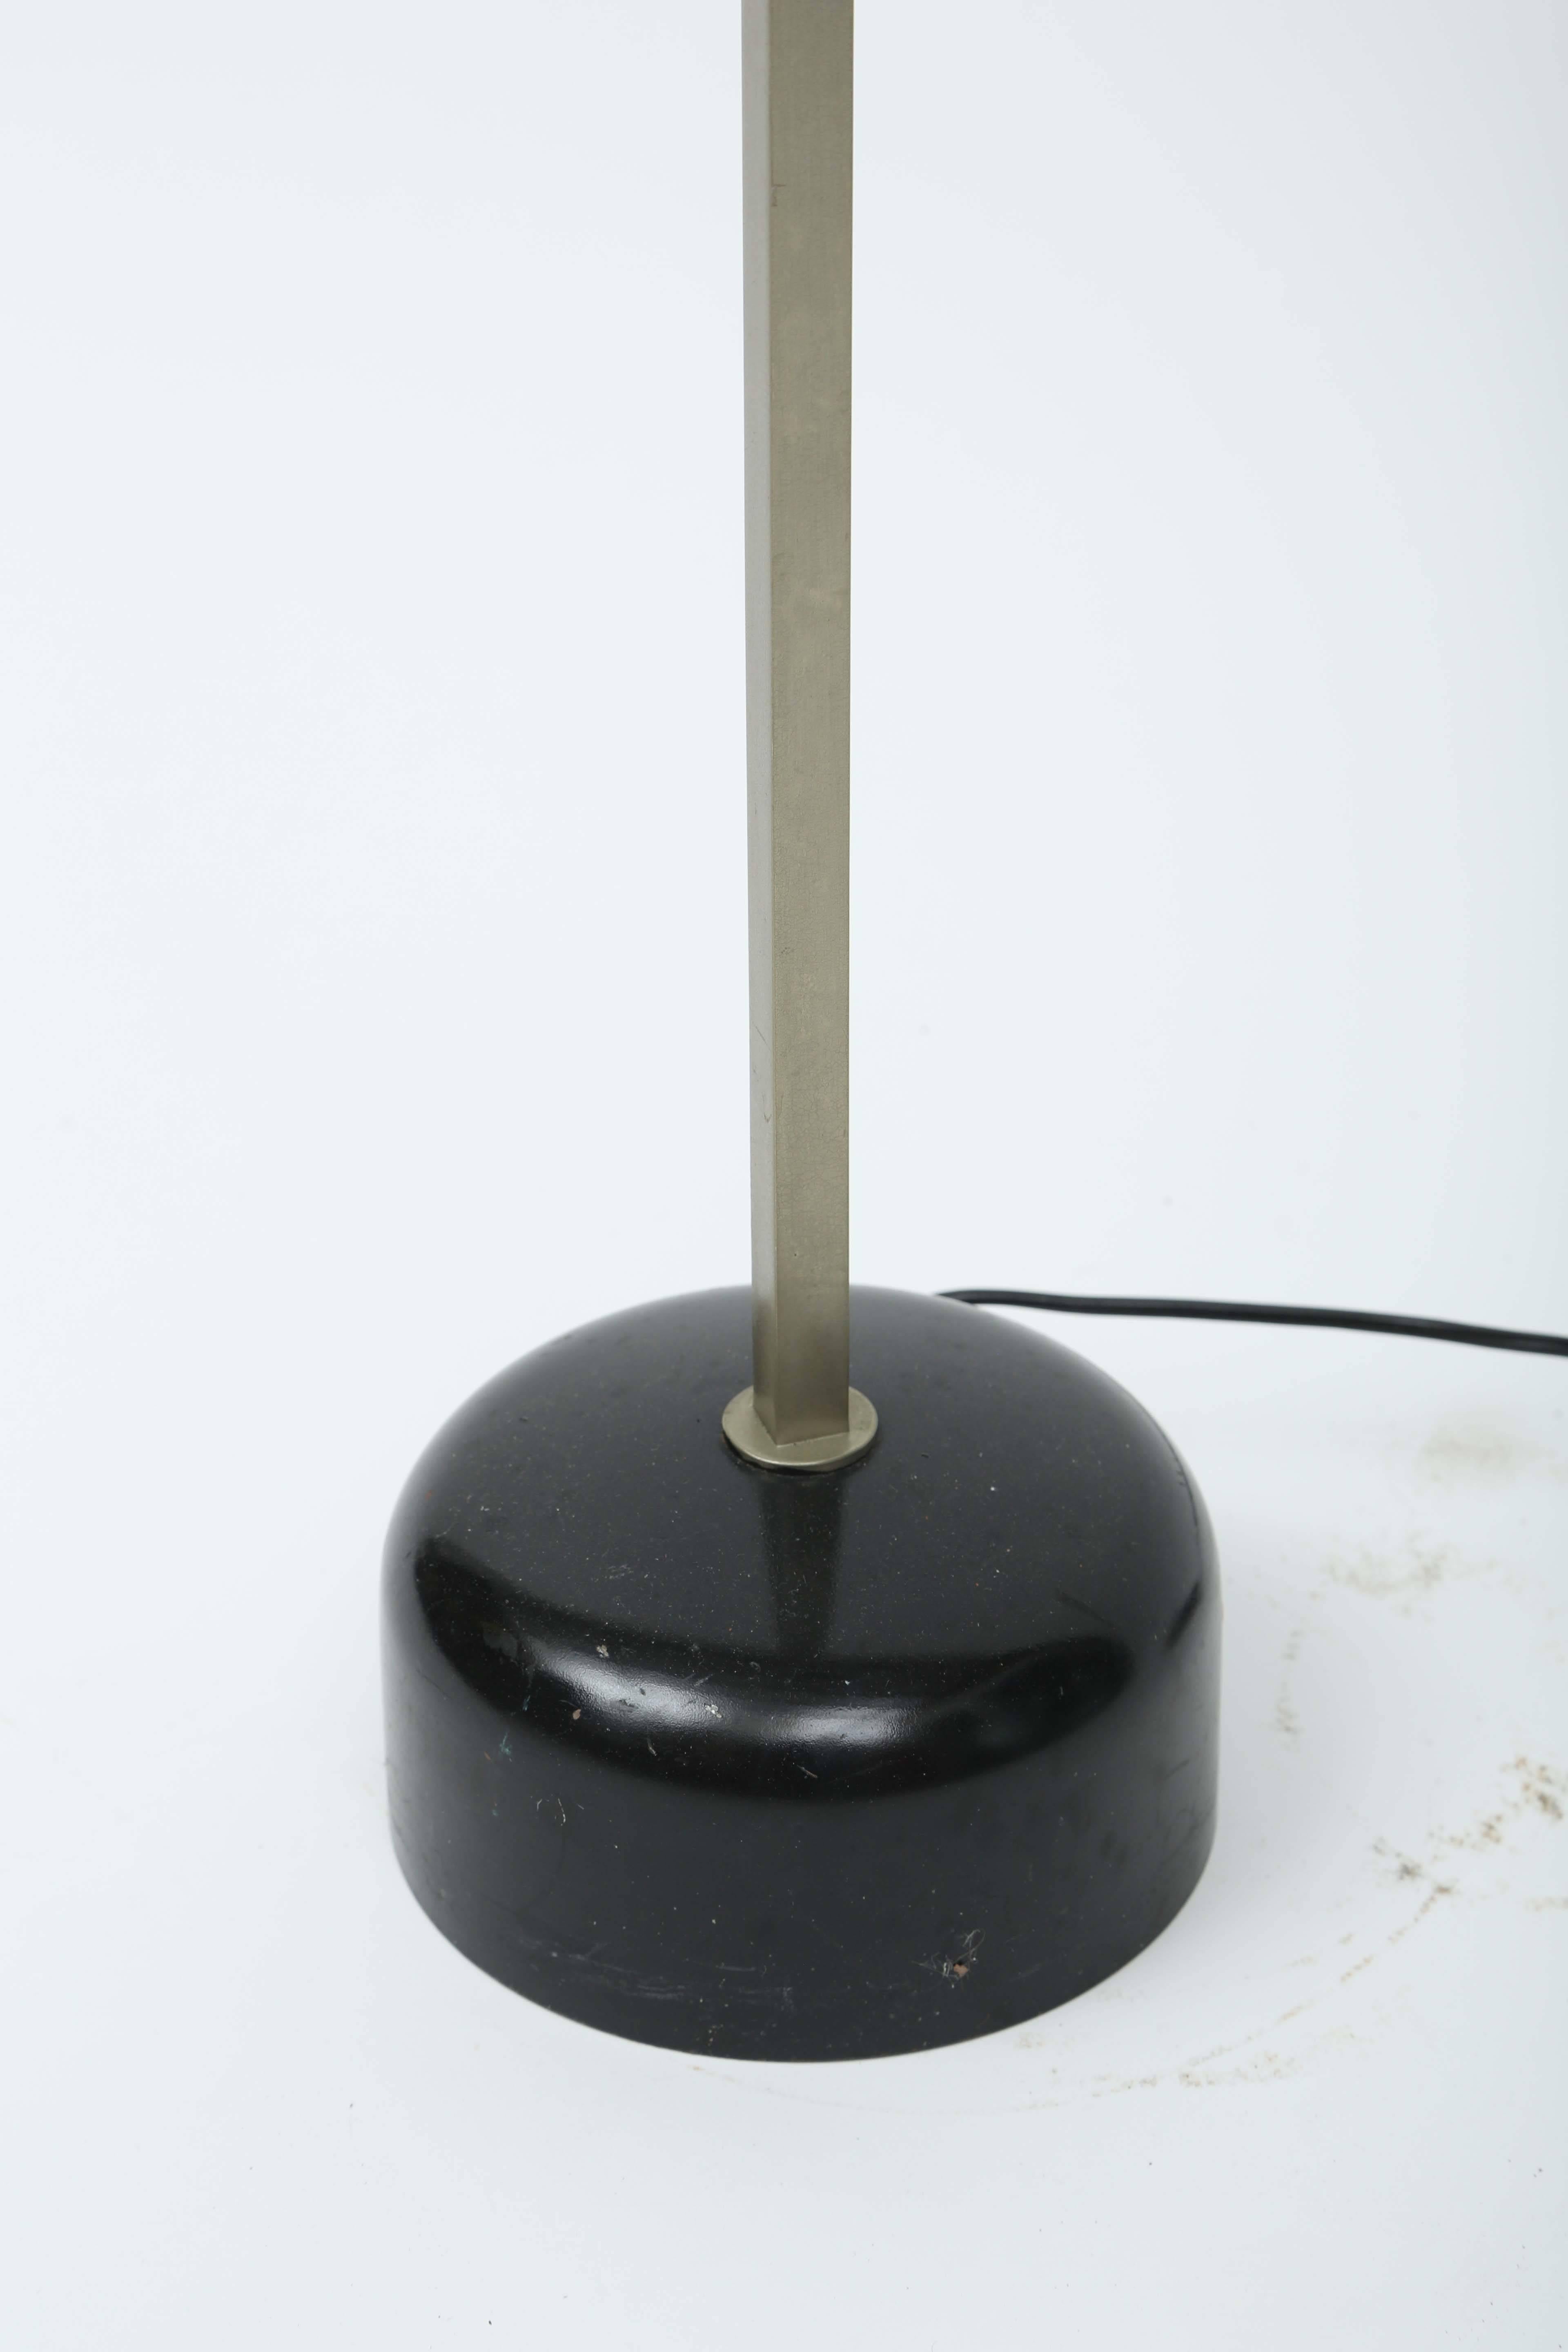 Pivoting magnetic floor lamp manufactured by Arredoluce
label below.